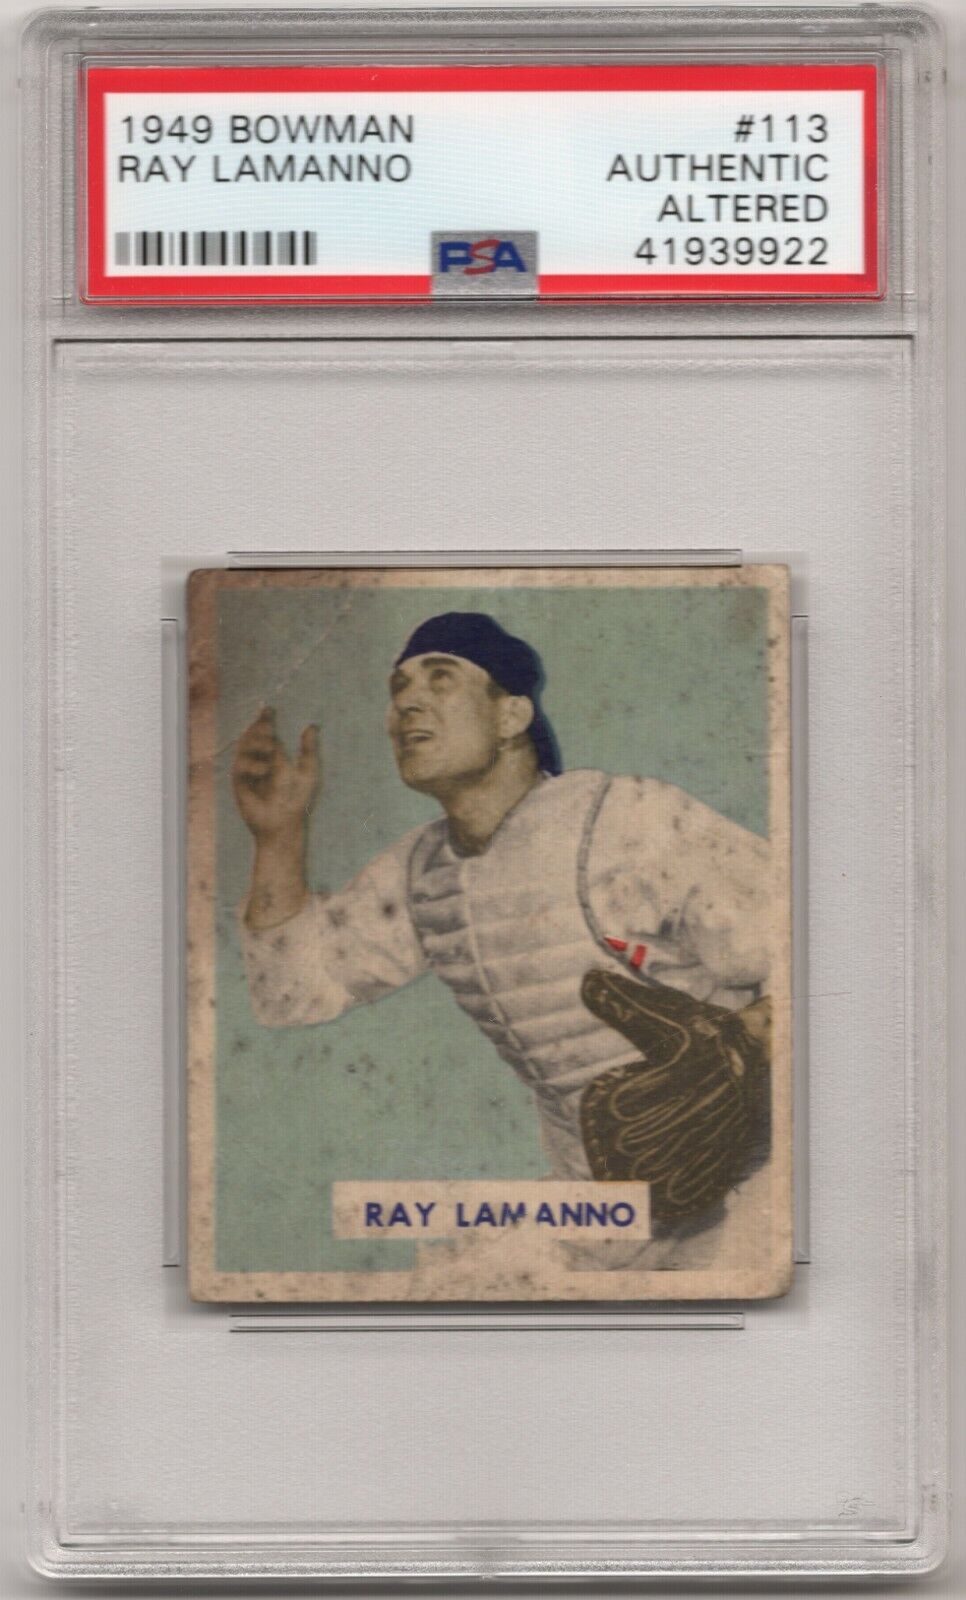 1949 Bowman #113 Cincinnati Reds Ray Lamanno GRADED by PSA Authentic Altered